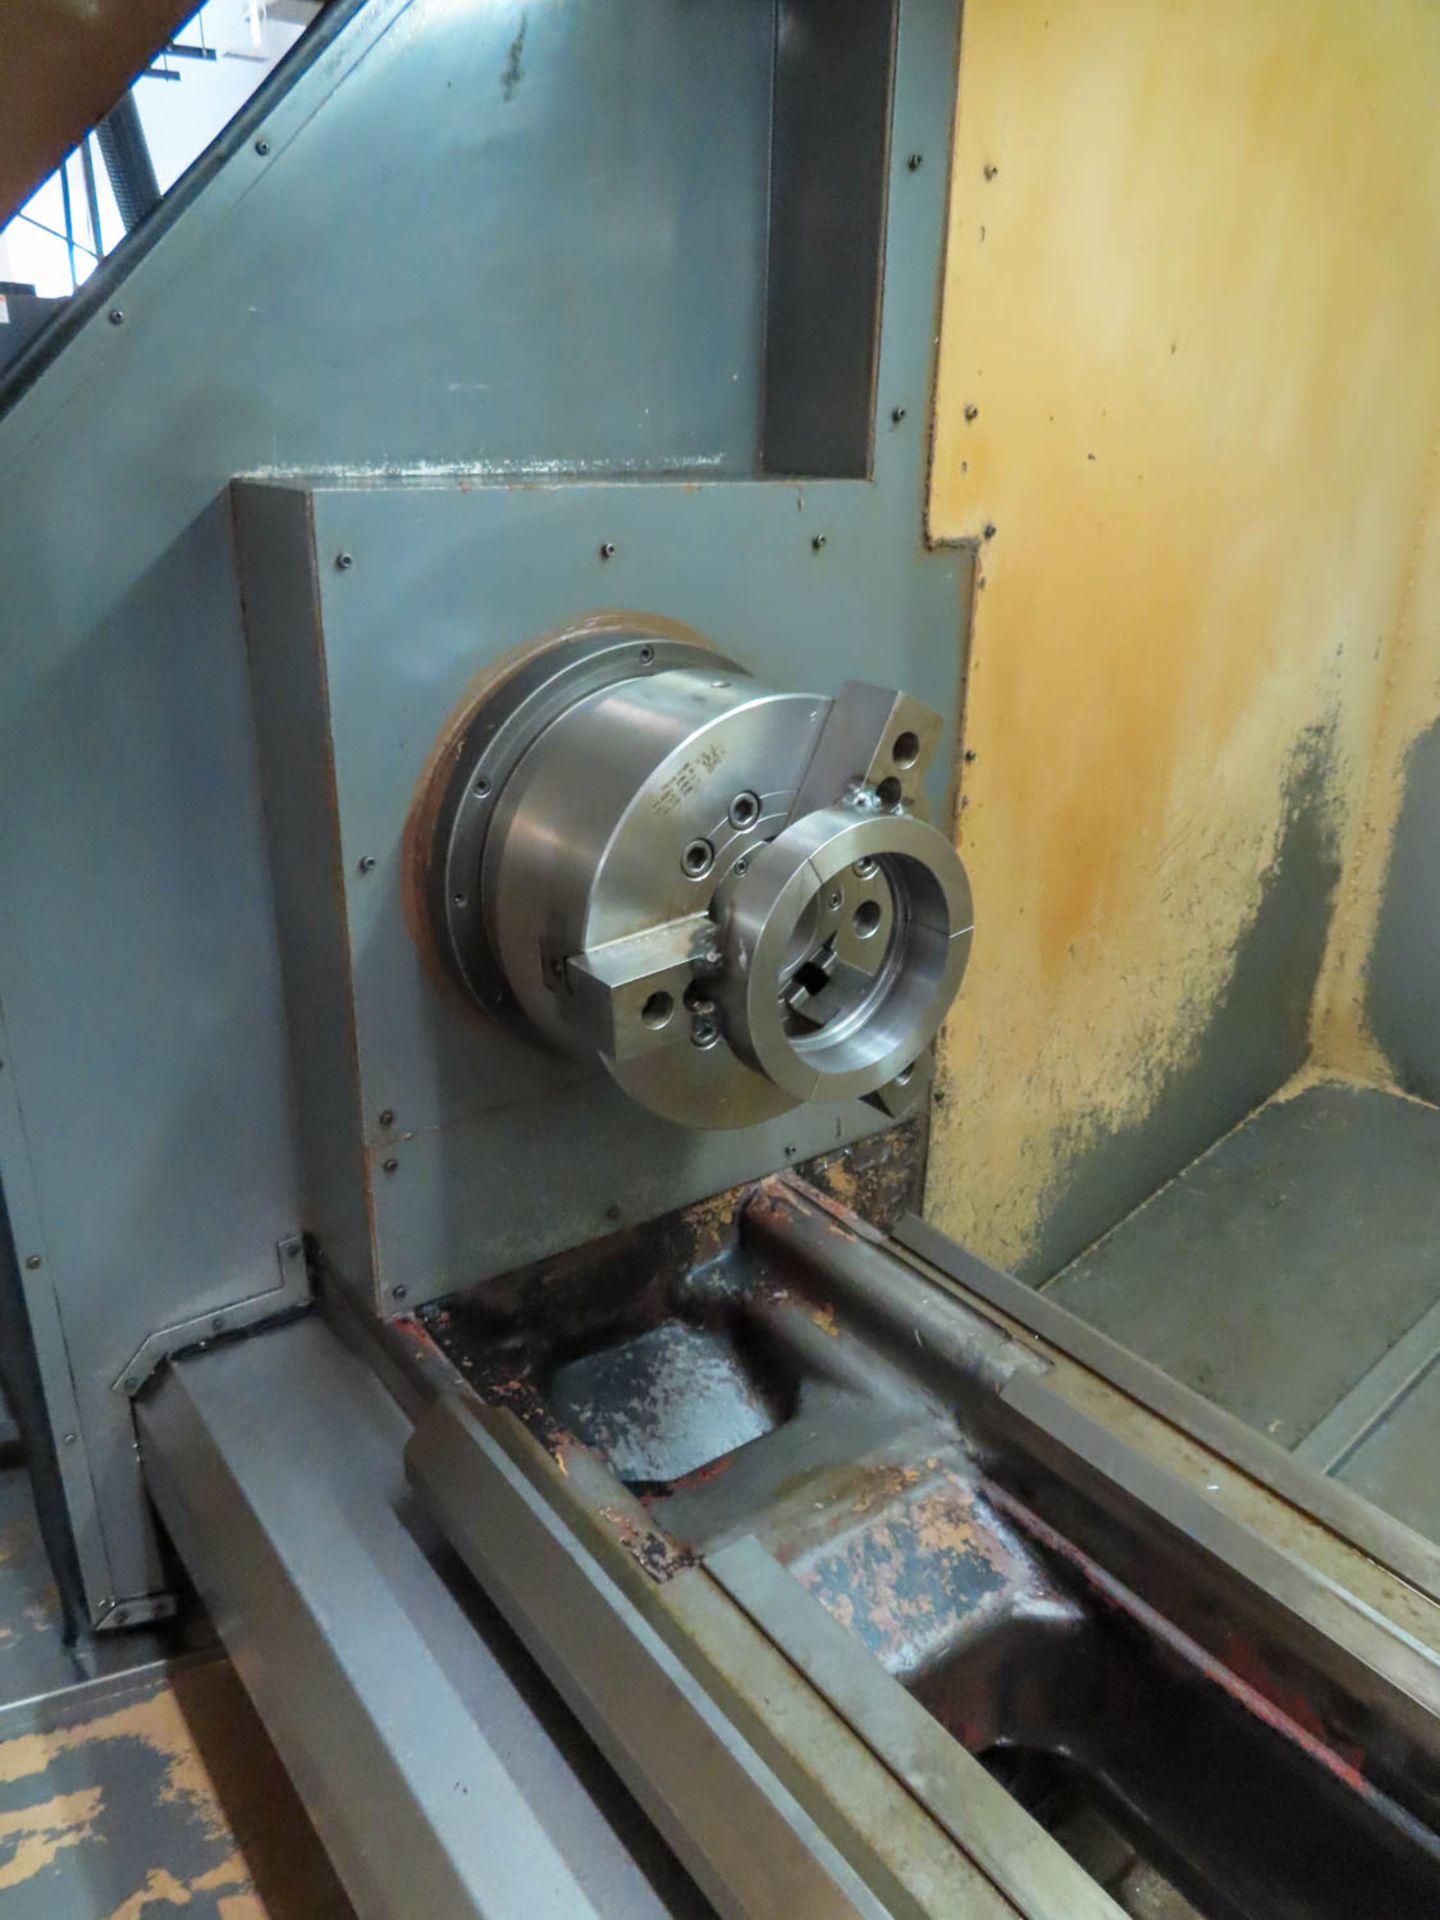 Hankook Proturn 60 X 2000 CNC Lathe, Fanuc 18iTB CNC, 29.9" Swing Over Bed, 29.9" Max. Turning(2005) - Image 7 of 10